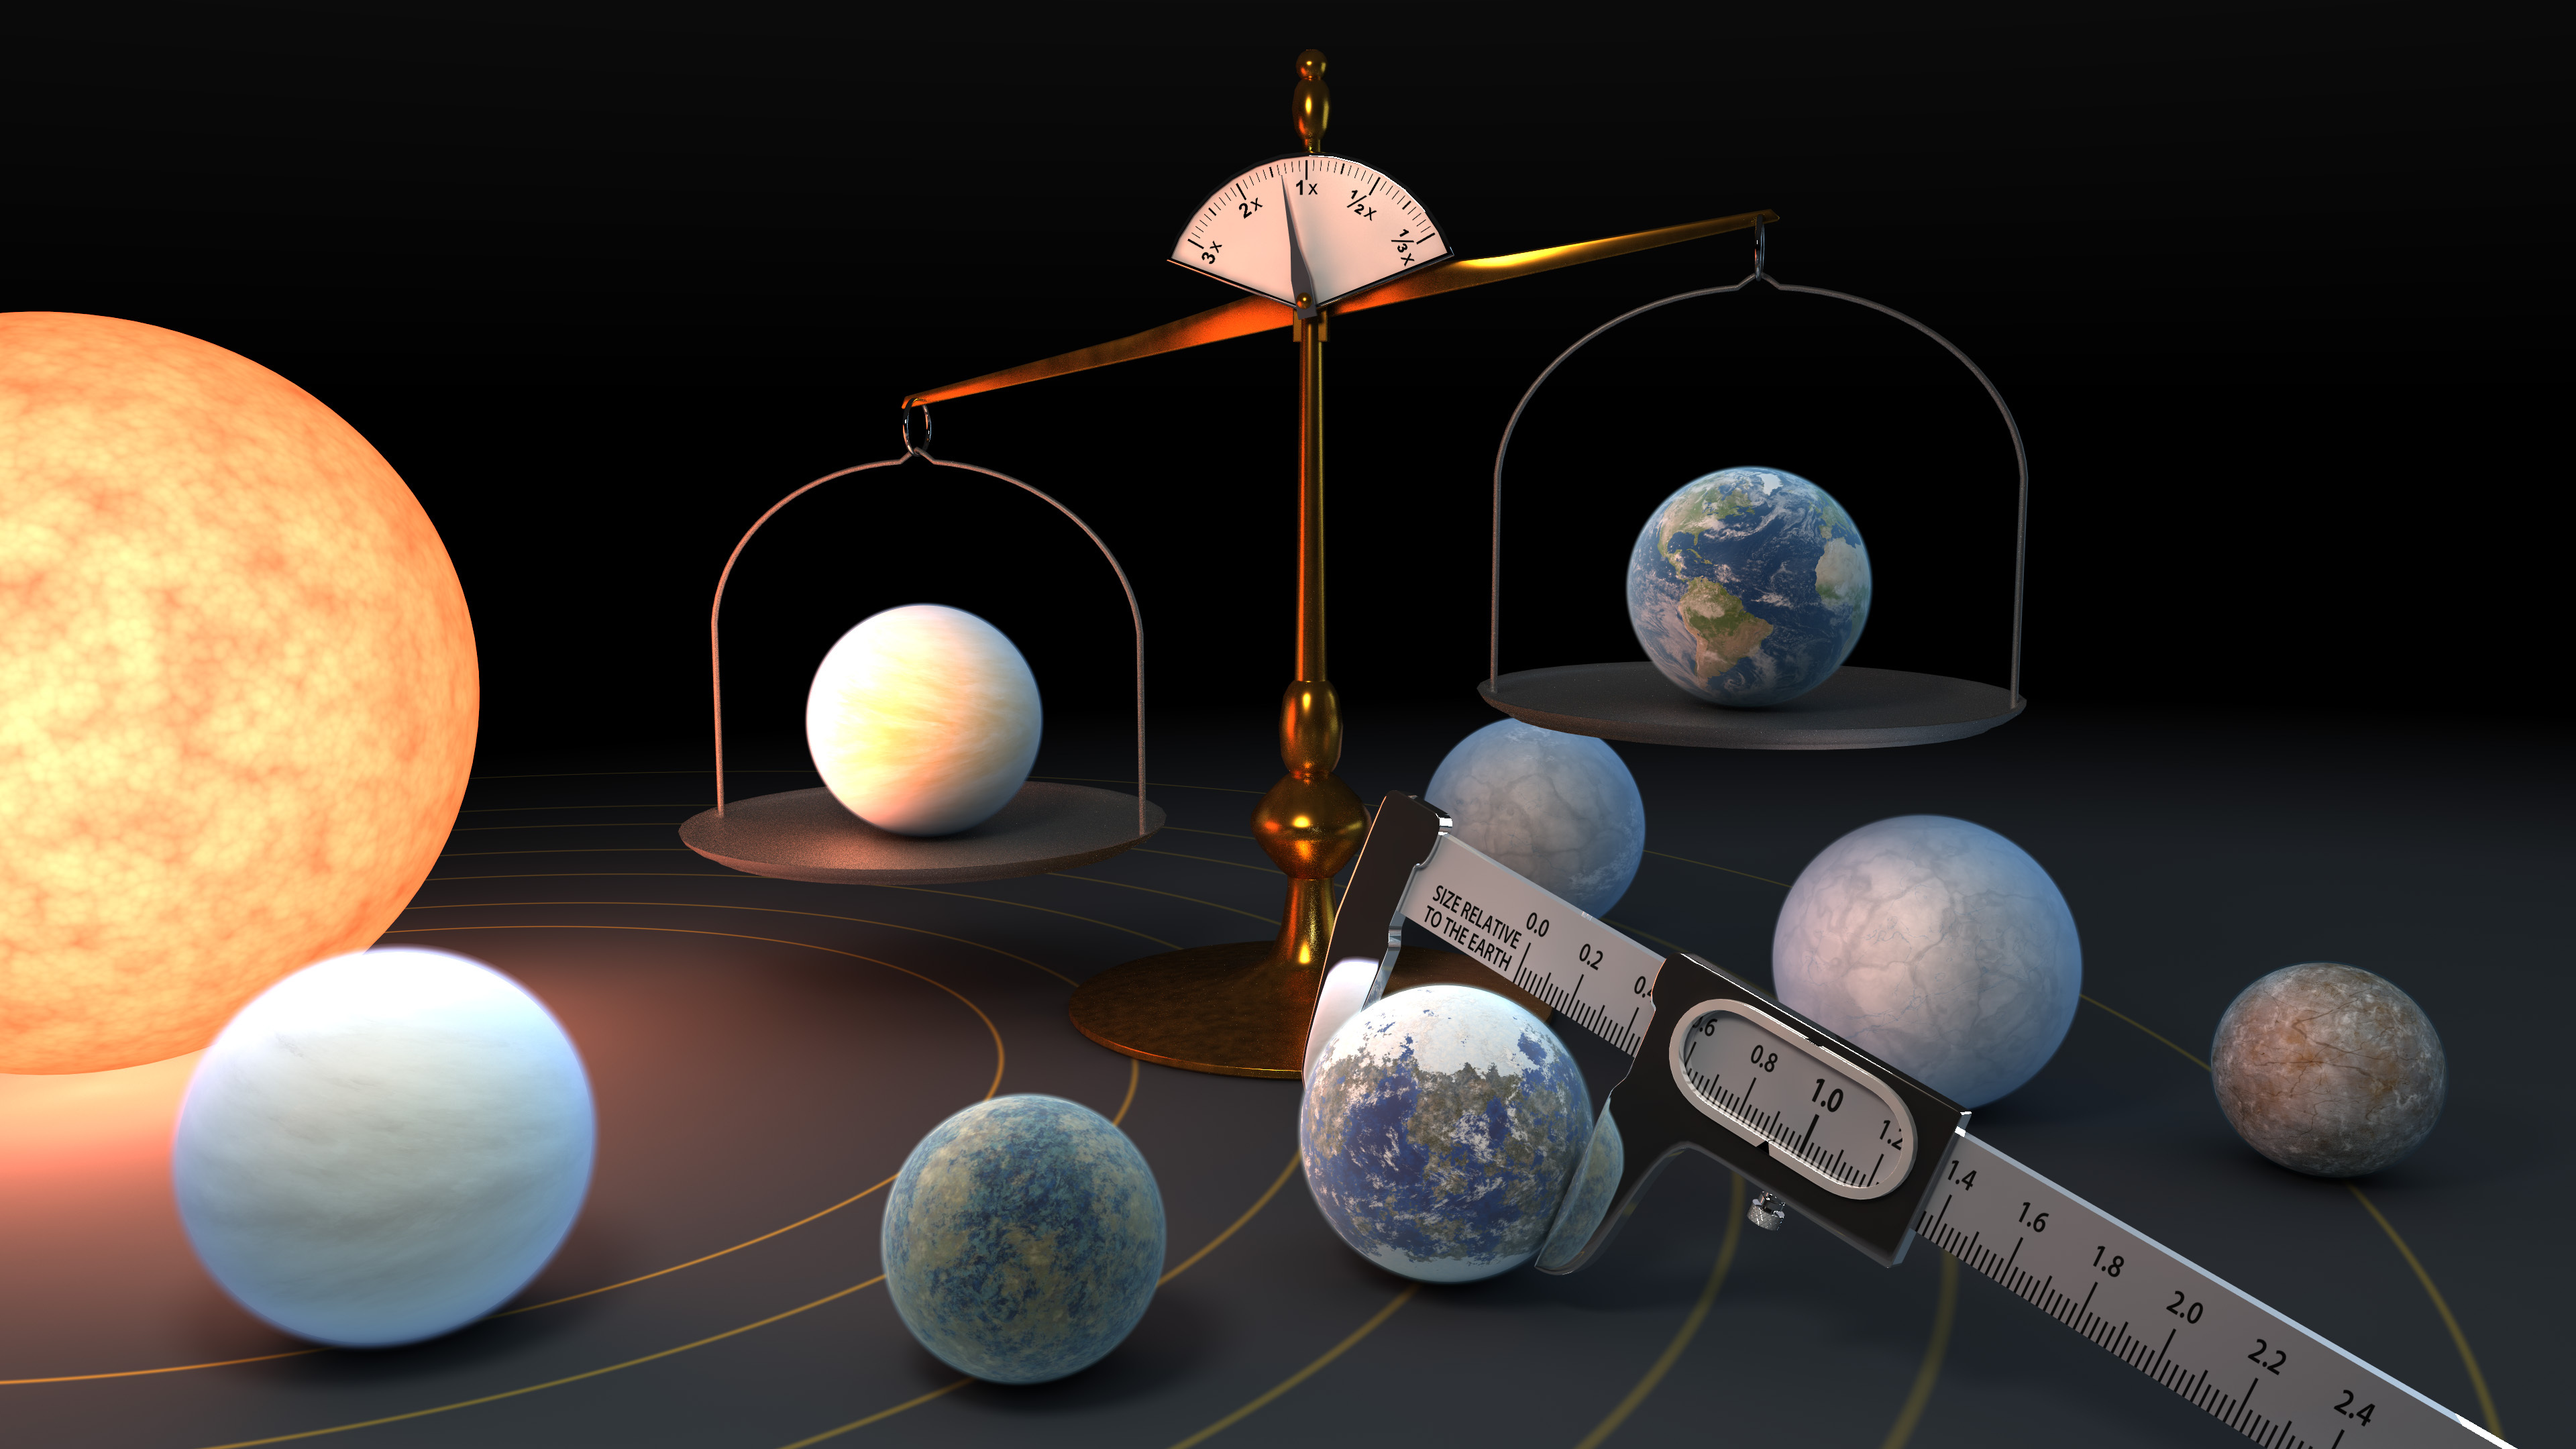 seven trappist-1 exoplanets seen in an illustration